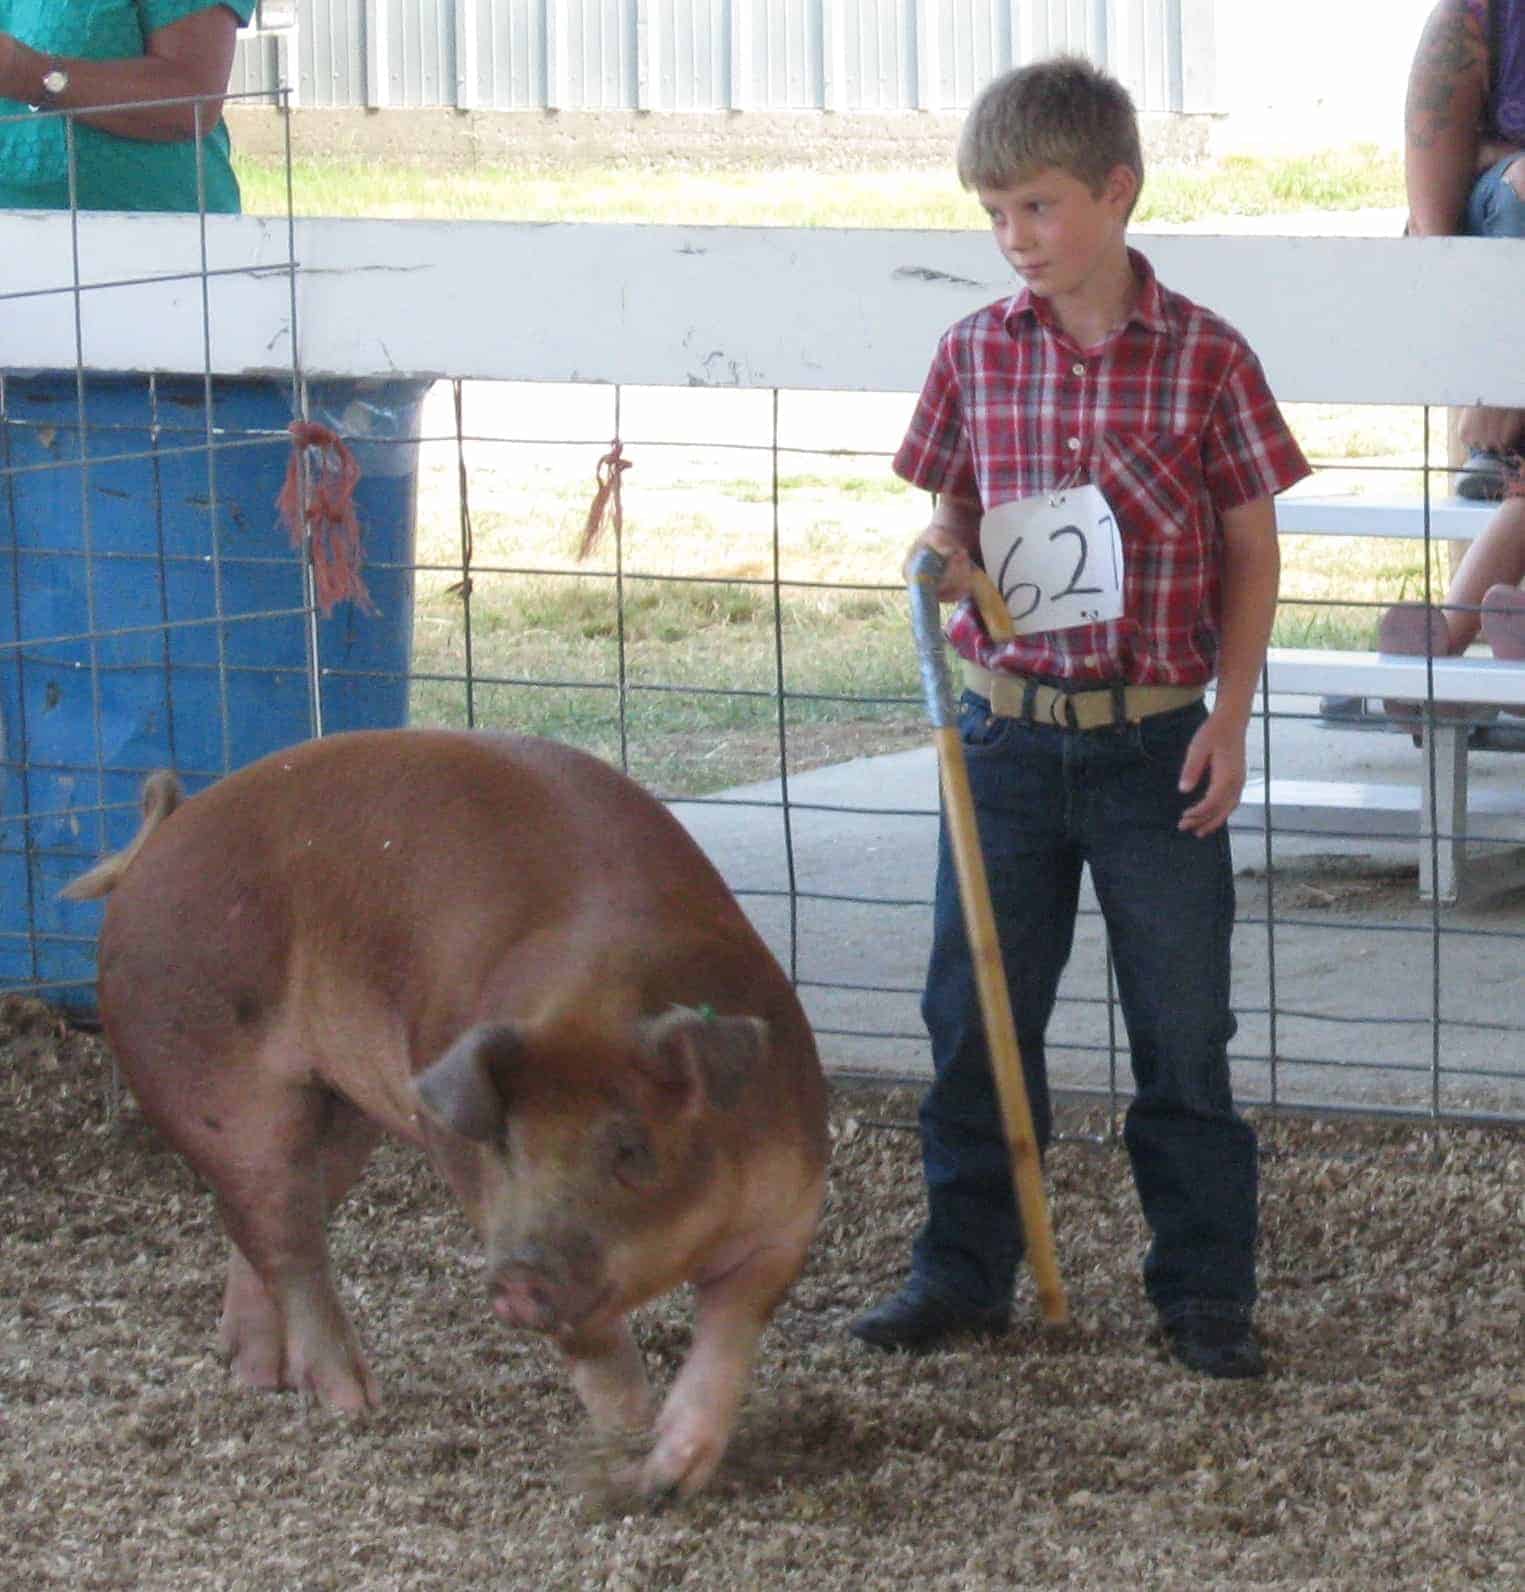 Showing a red pig at the county fair.